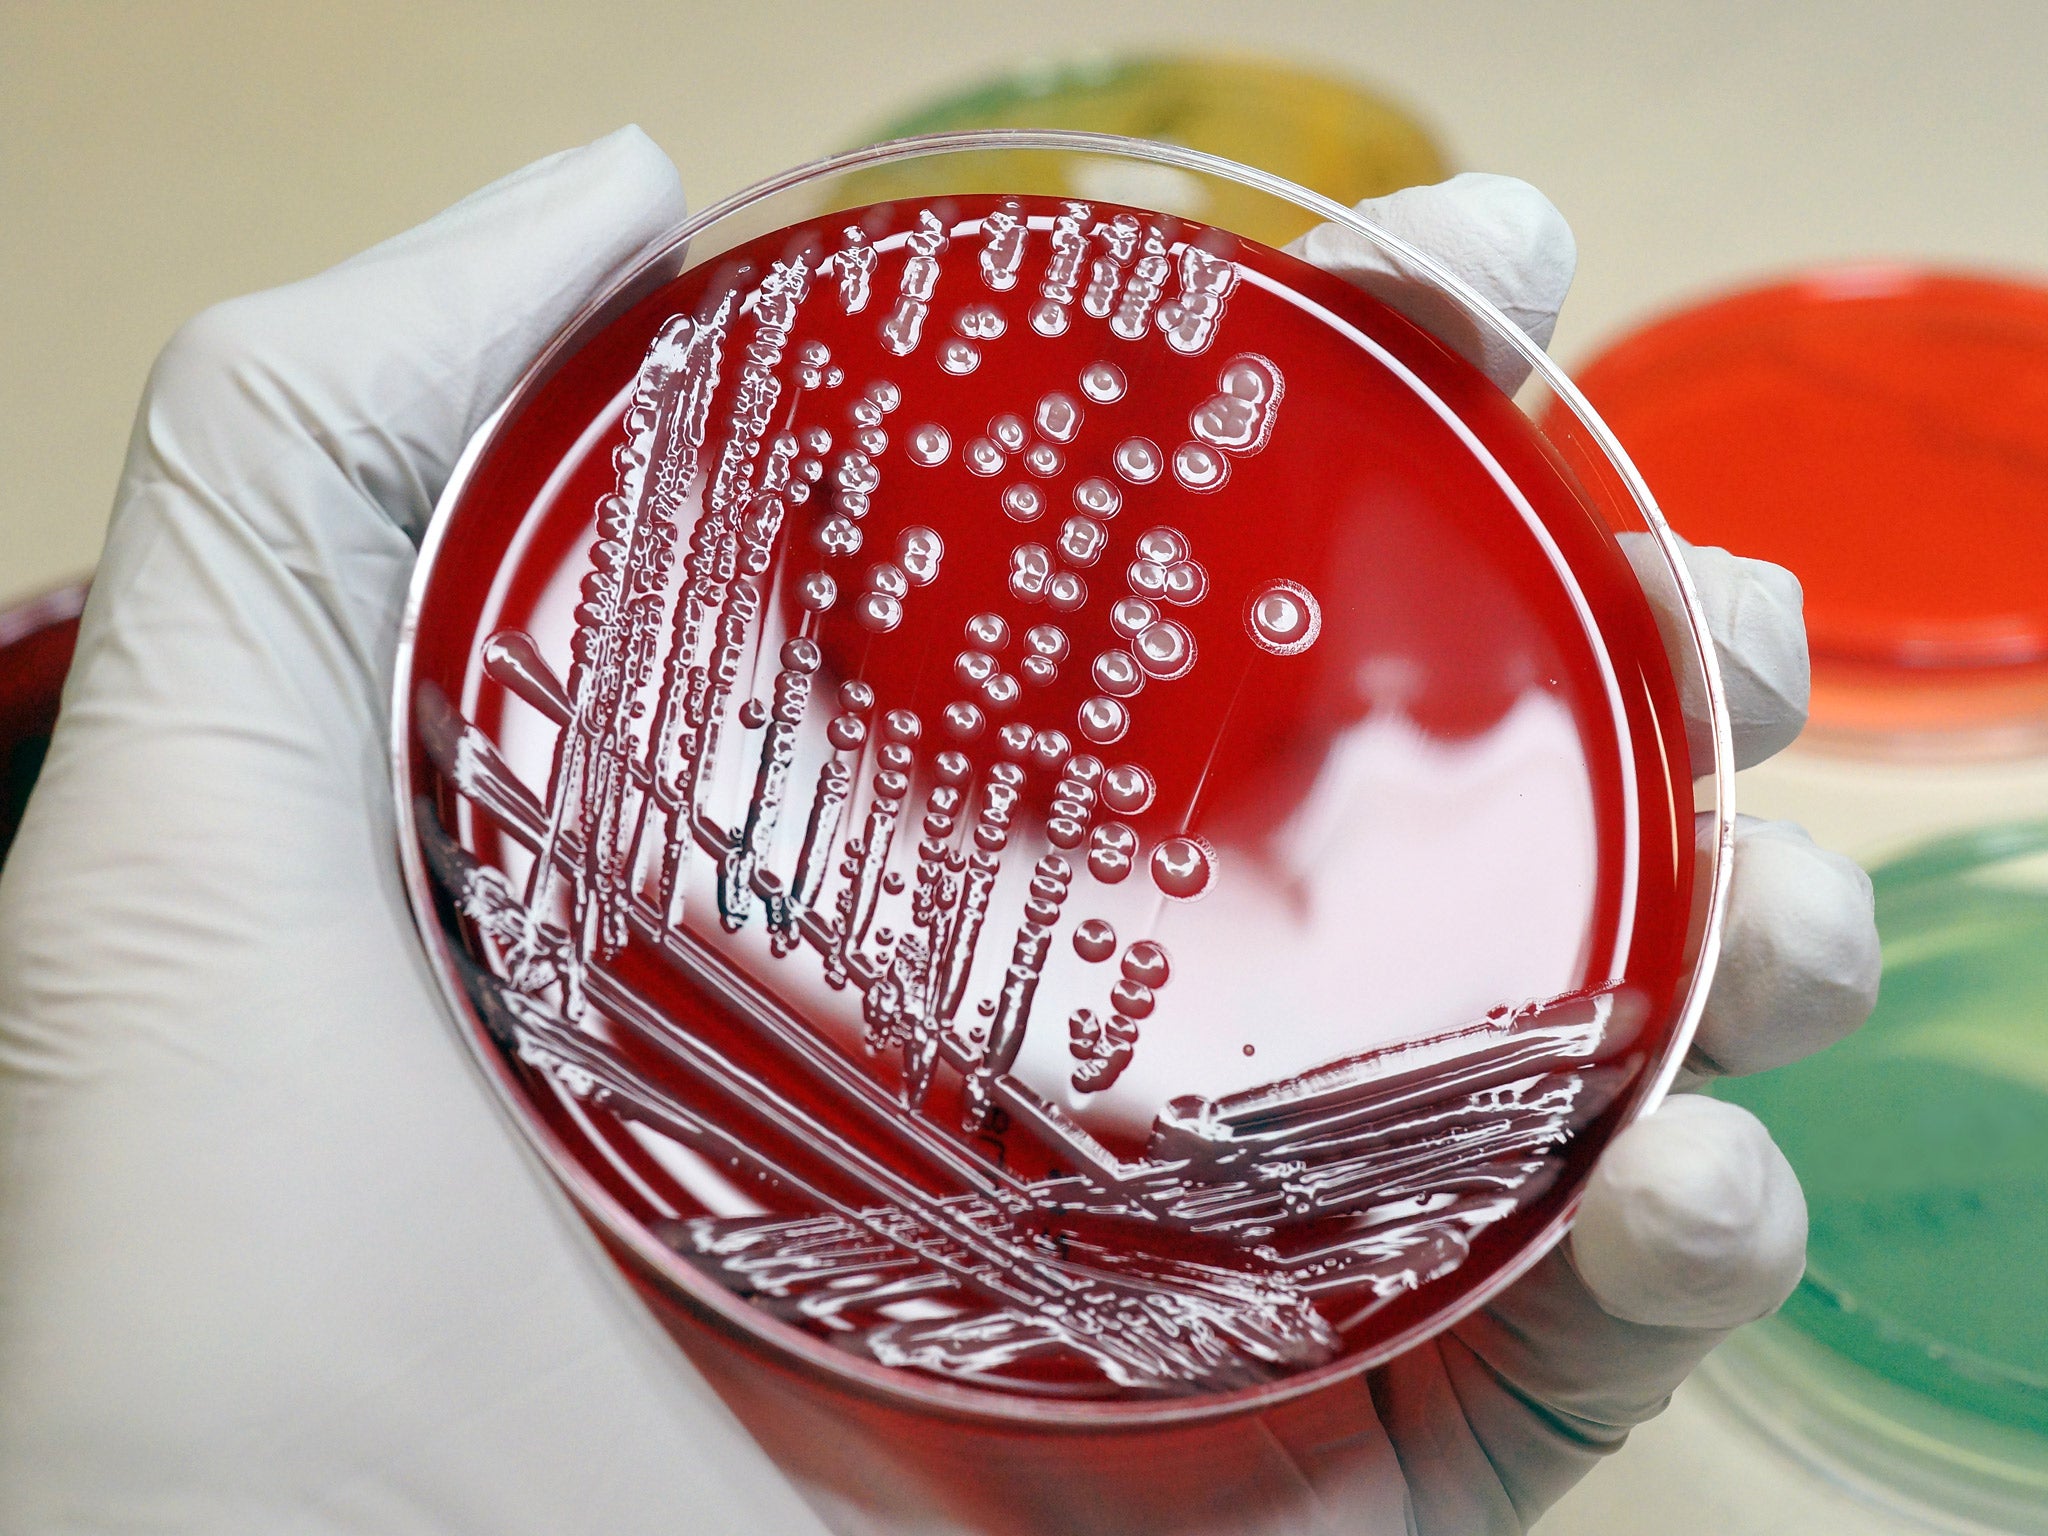 Infections caused by superbugs – such as MRSA – are a major threat to human and animal health